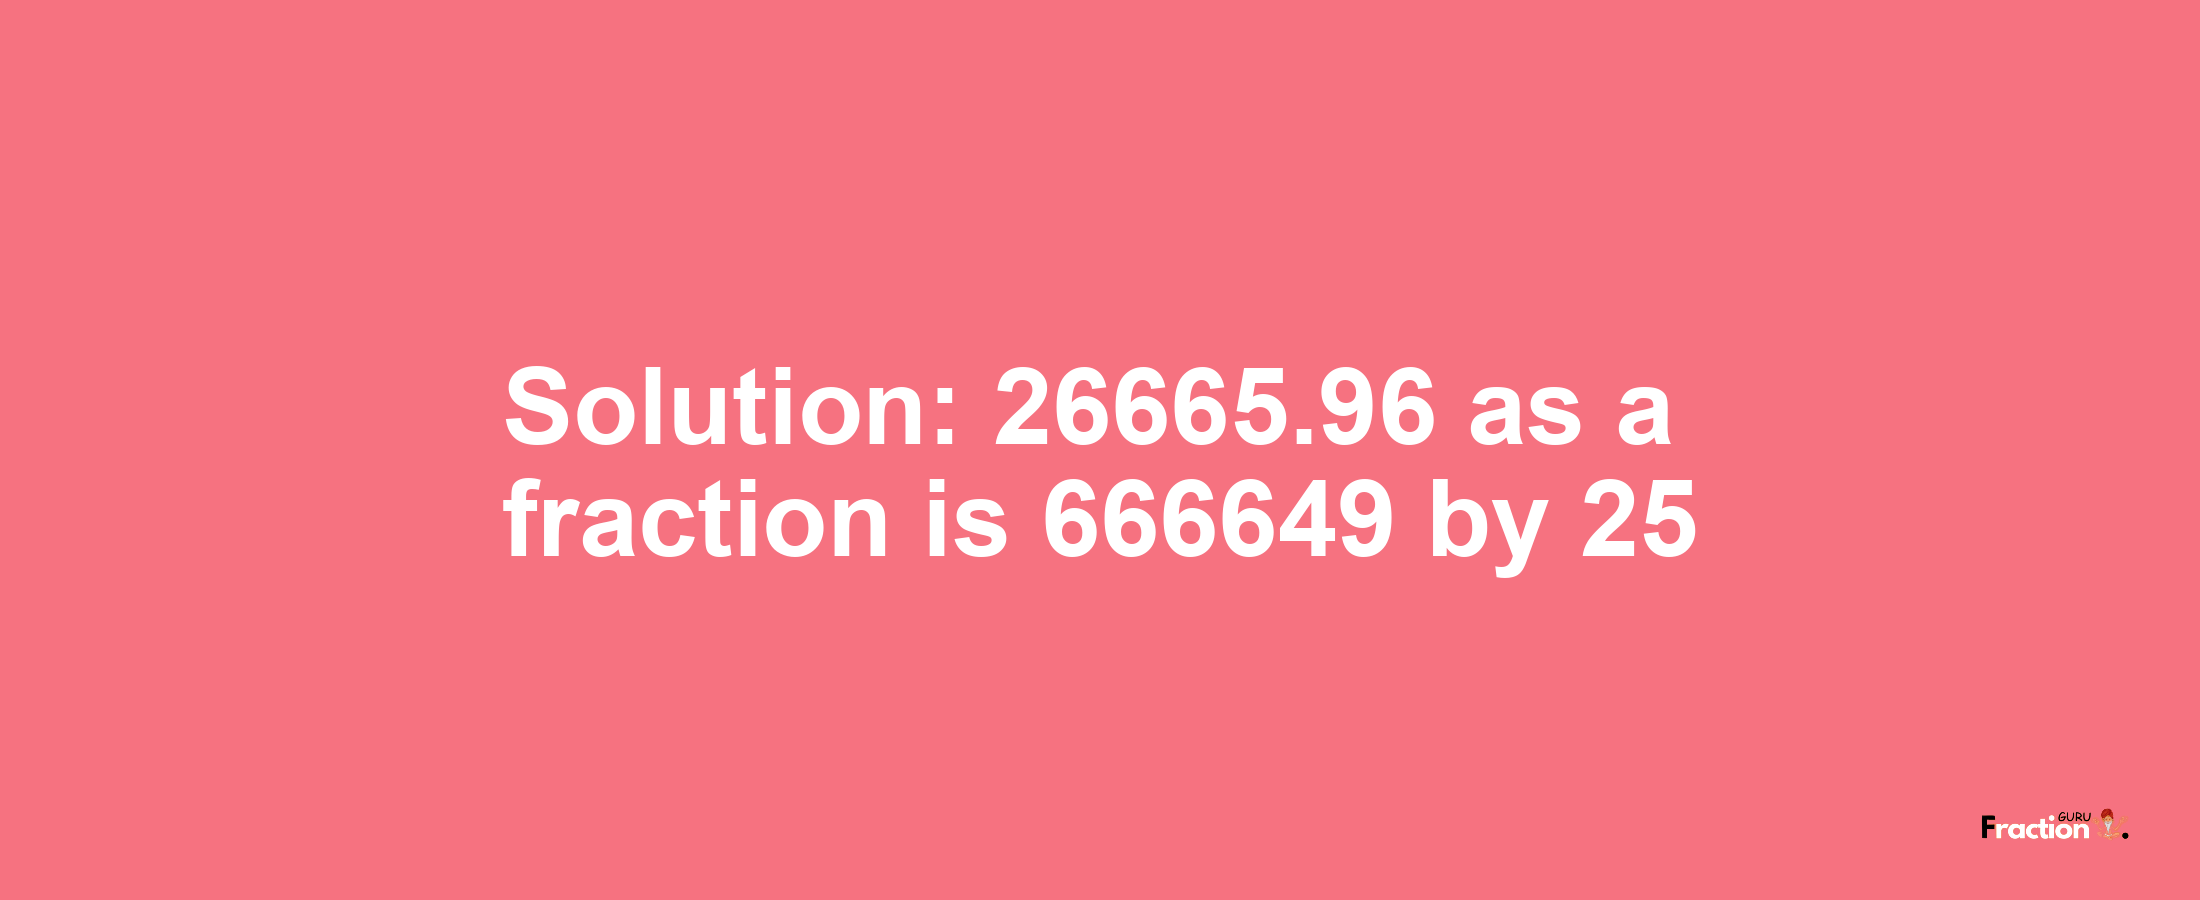 Solution:26665.96 as a fraction is 666649/25